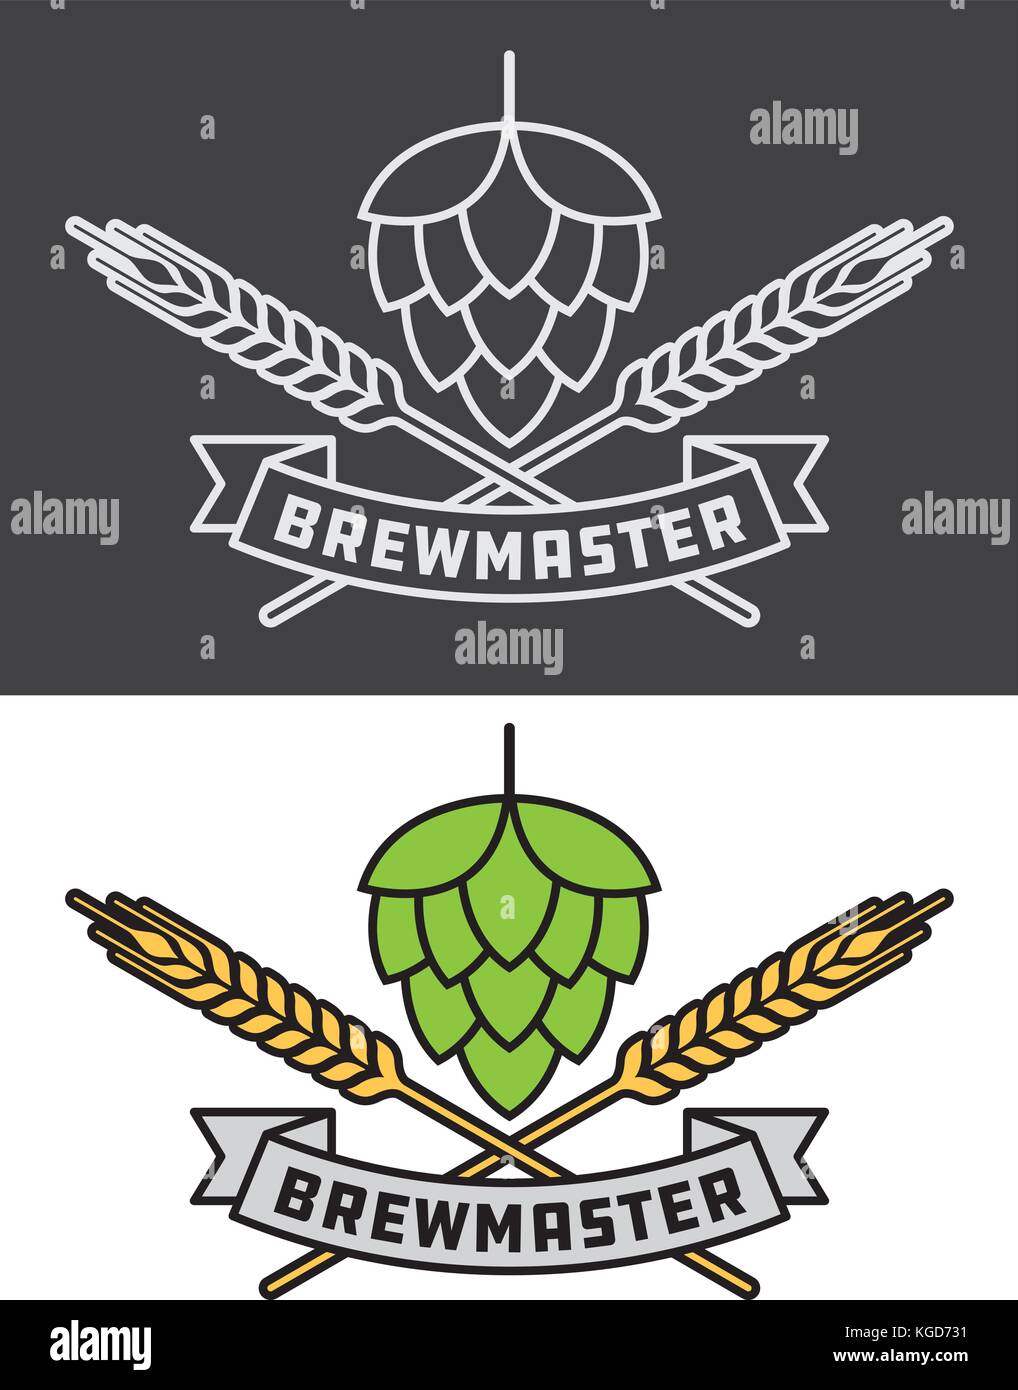 Brewmaster Craft Beer Vector Design icon or logo graphic. Shows hops over crossed barley or wheat with brewmaster banner. Color or black and white. Stock Vector